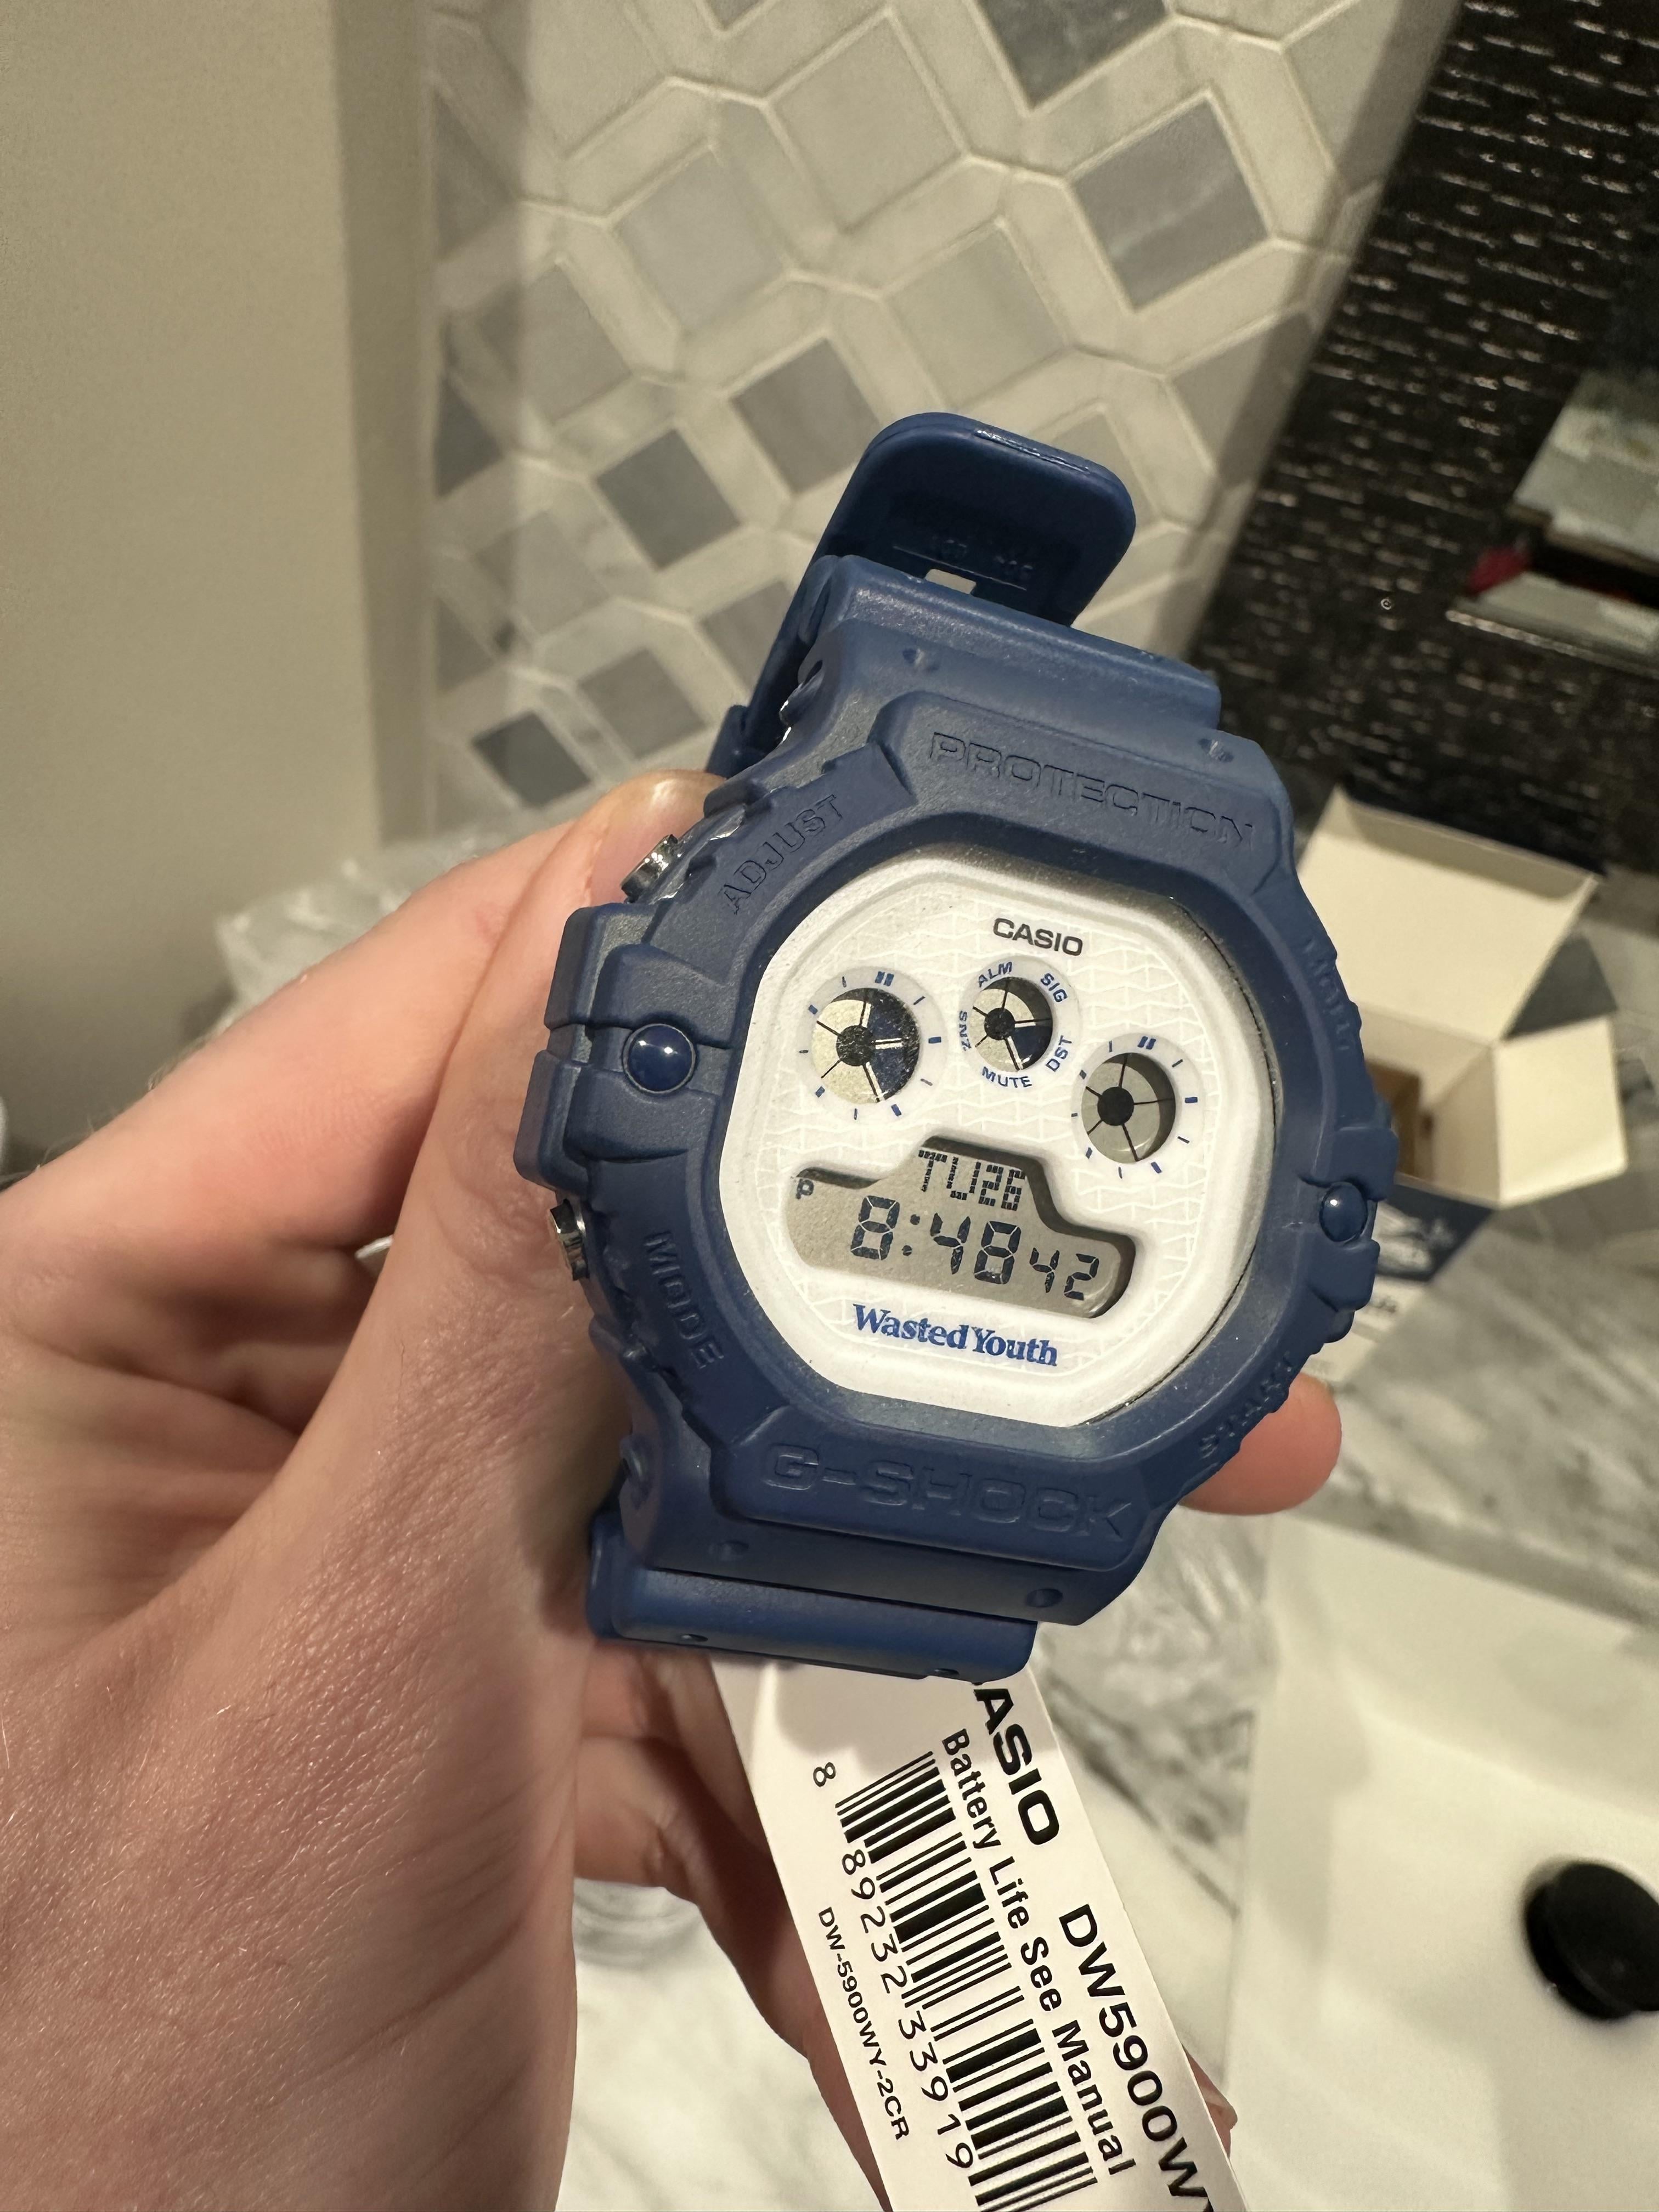 [WTS] LIMITED EDITION Casio G-Shock “Wasted Youth